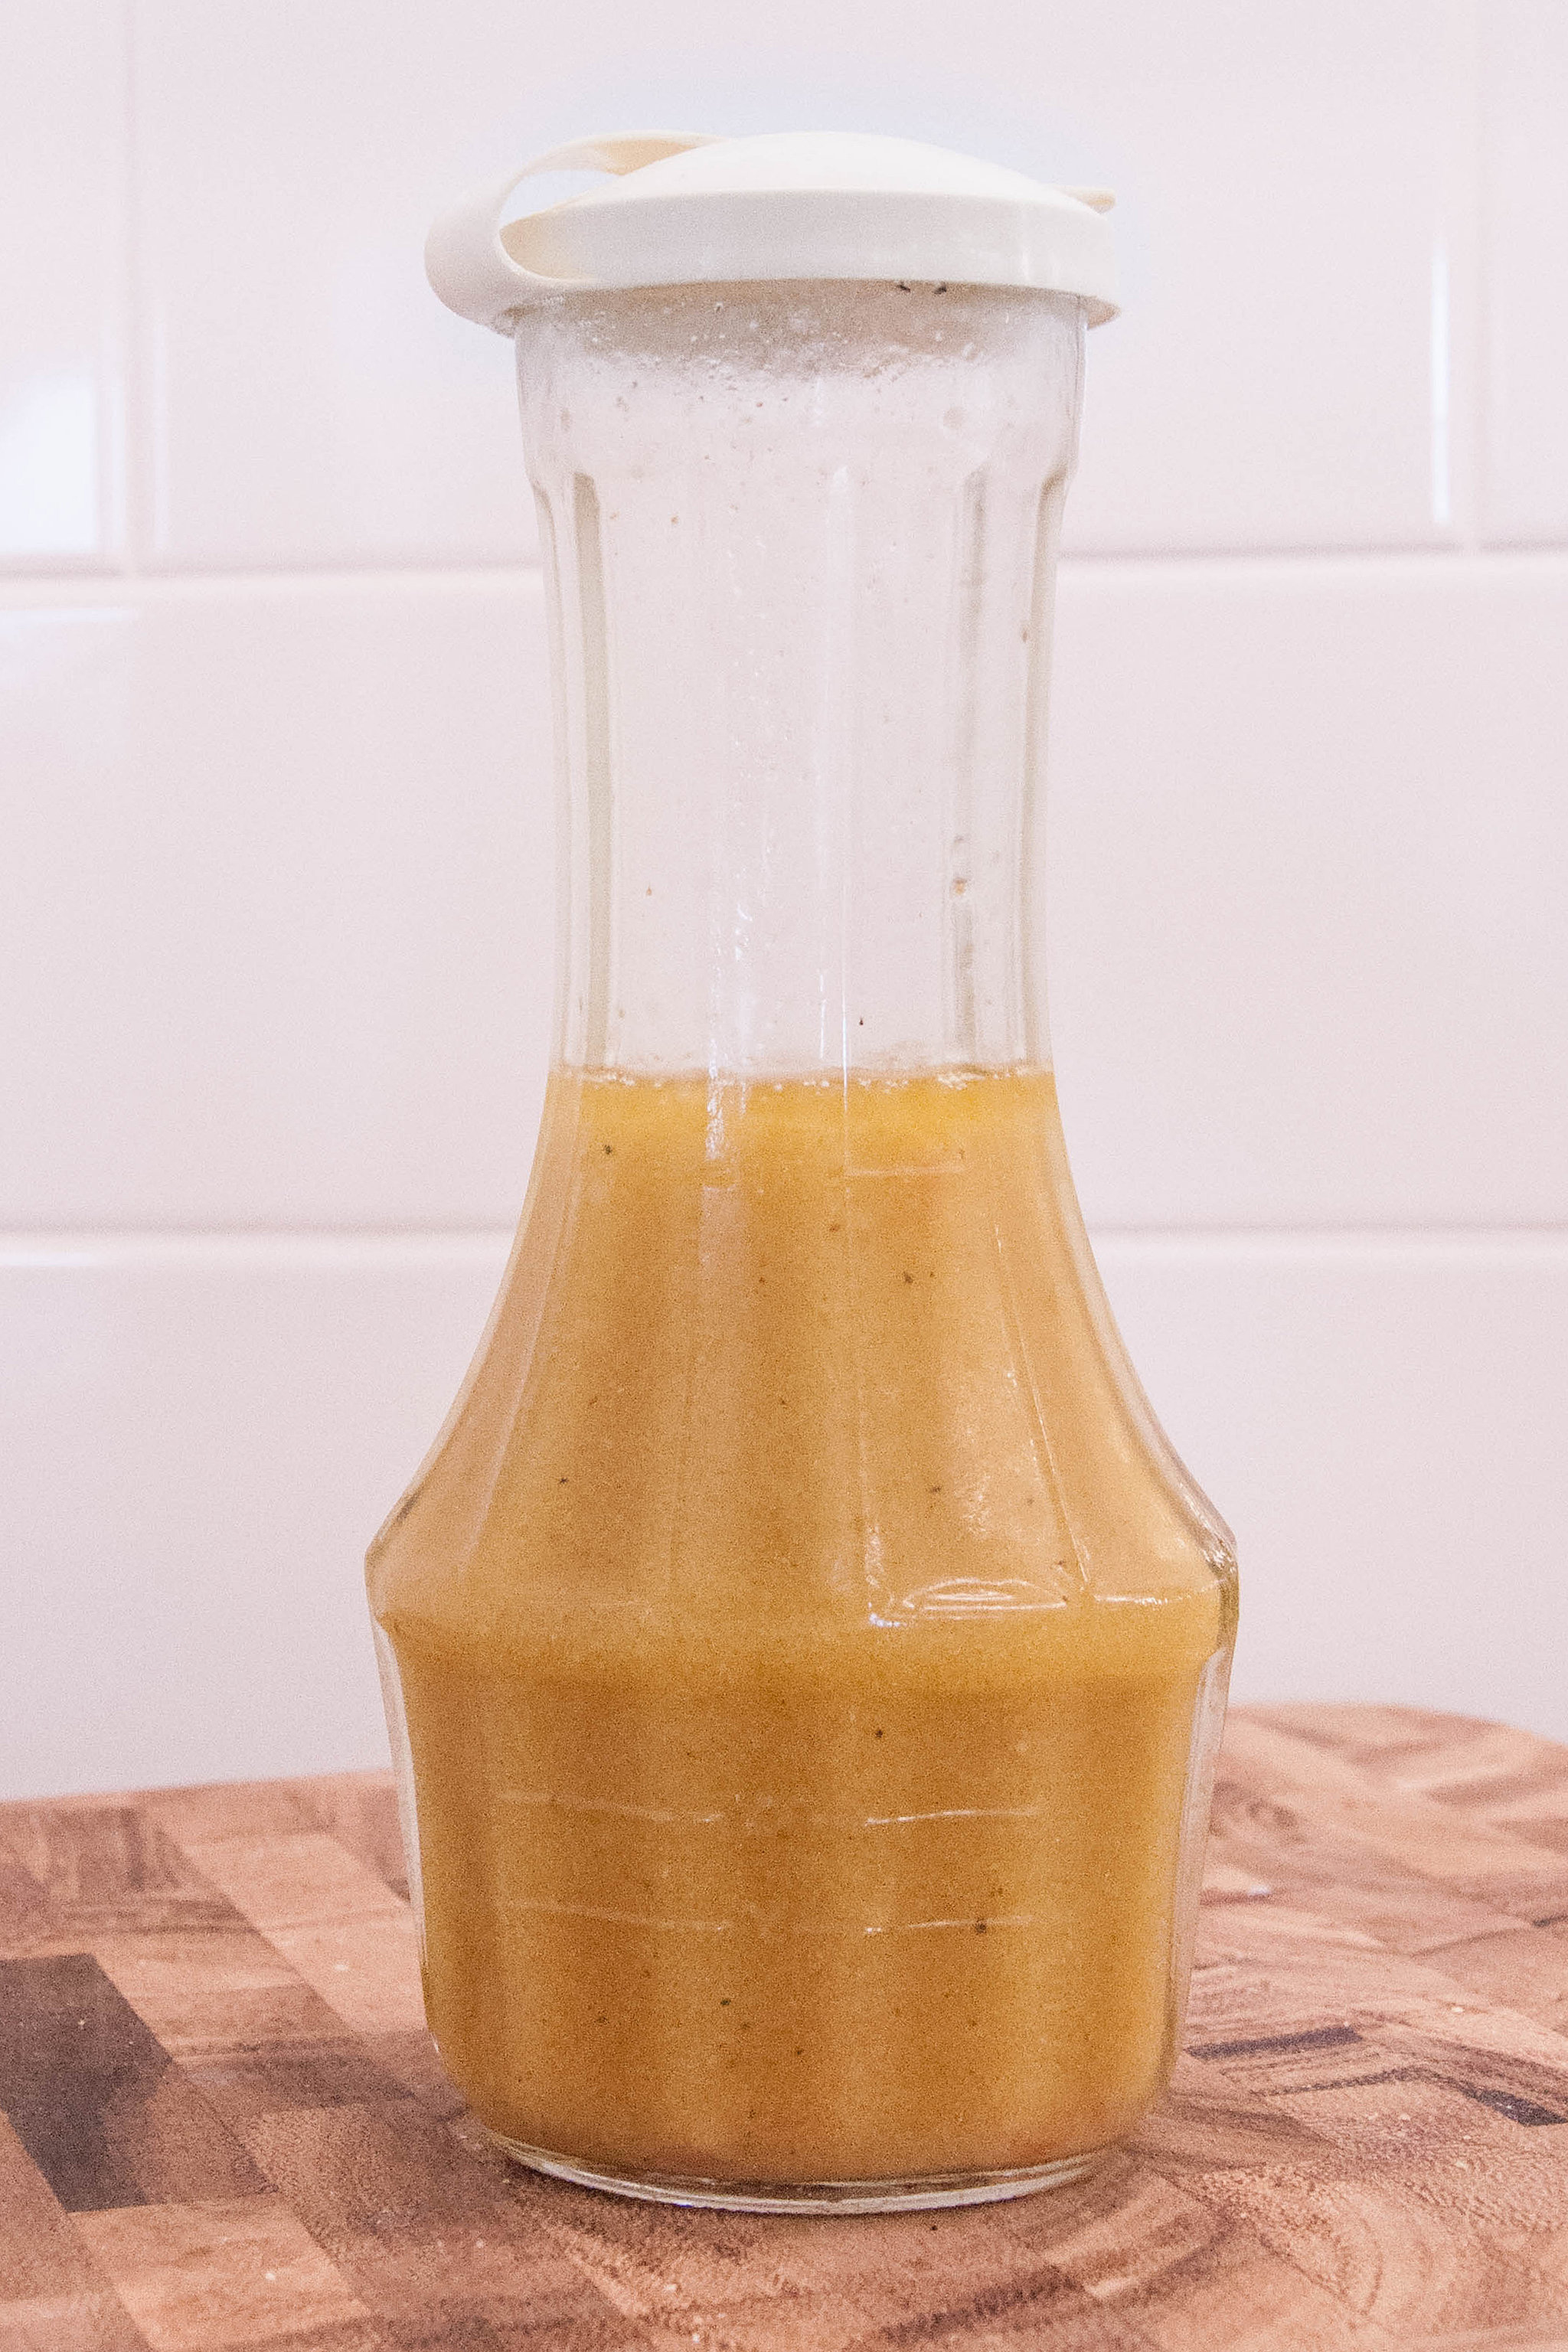 Try This Healthy ACV and Grapefruit Salad Dressing